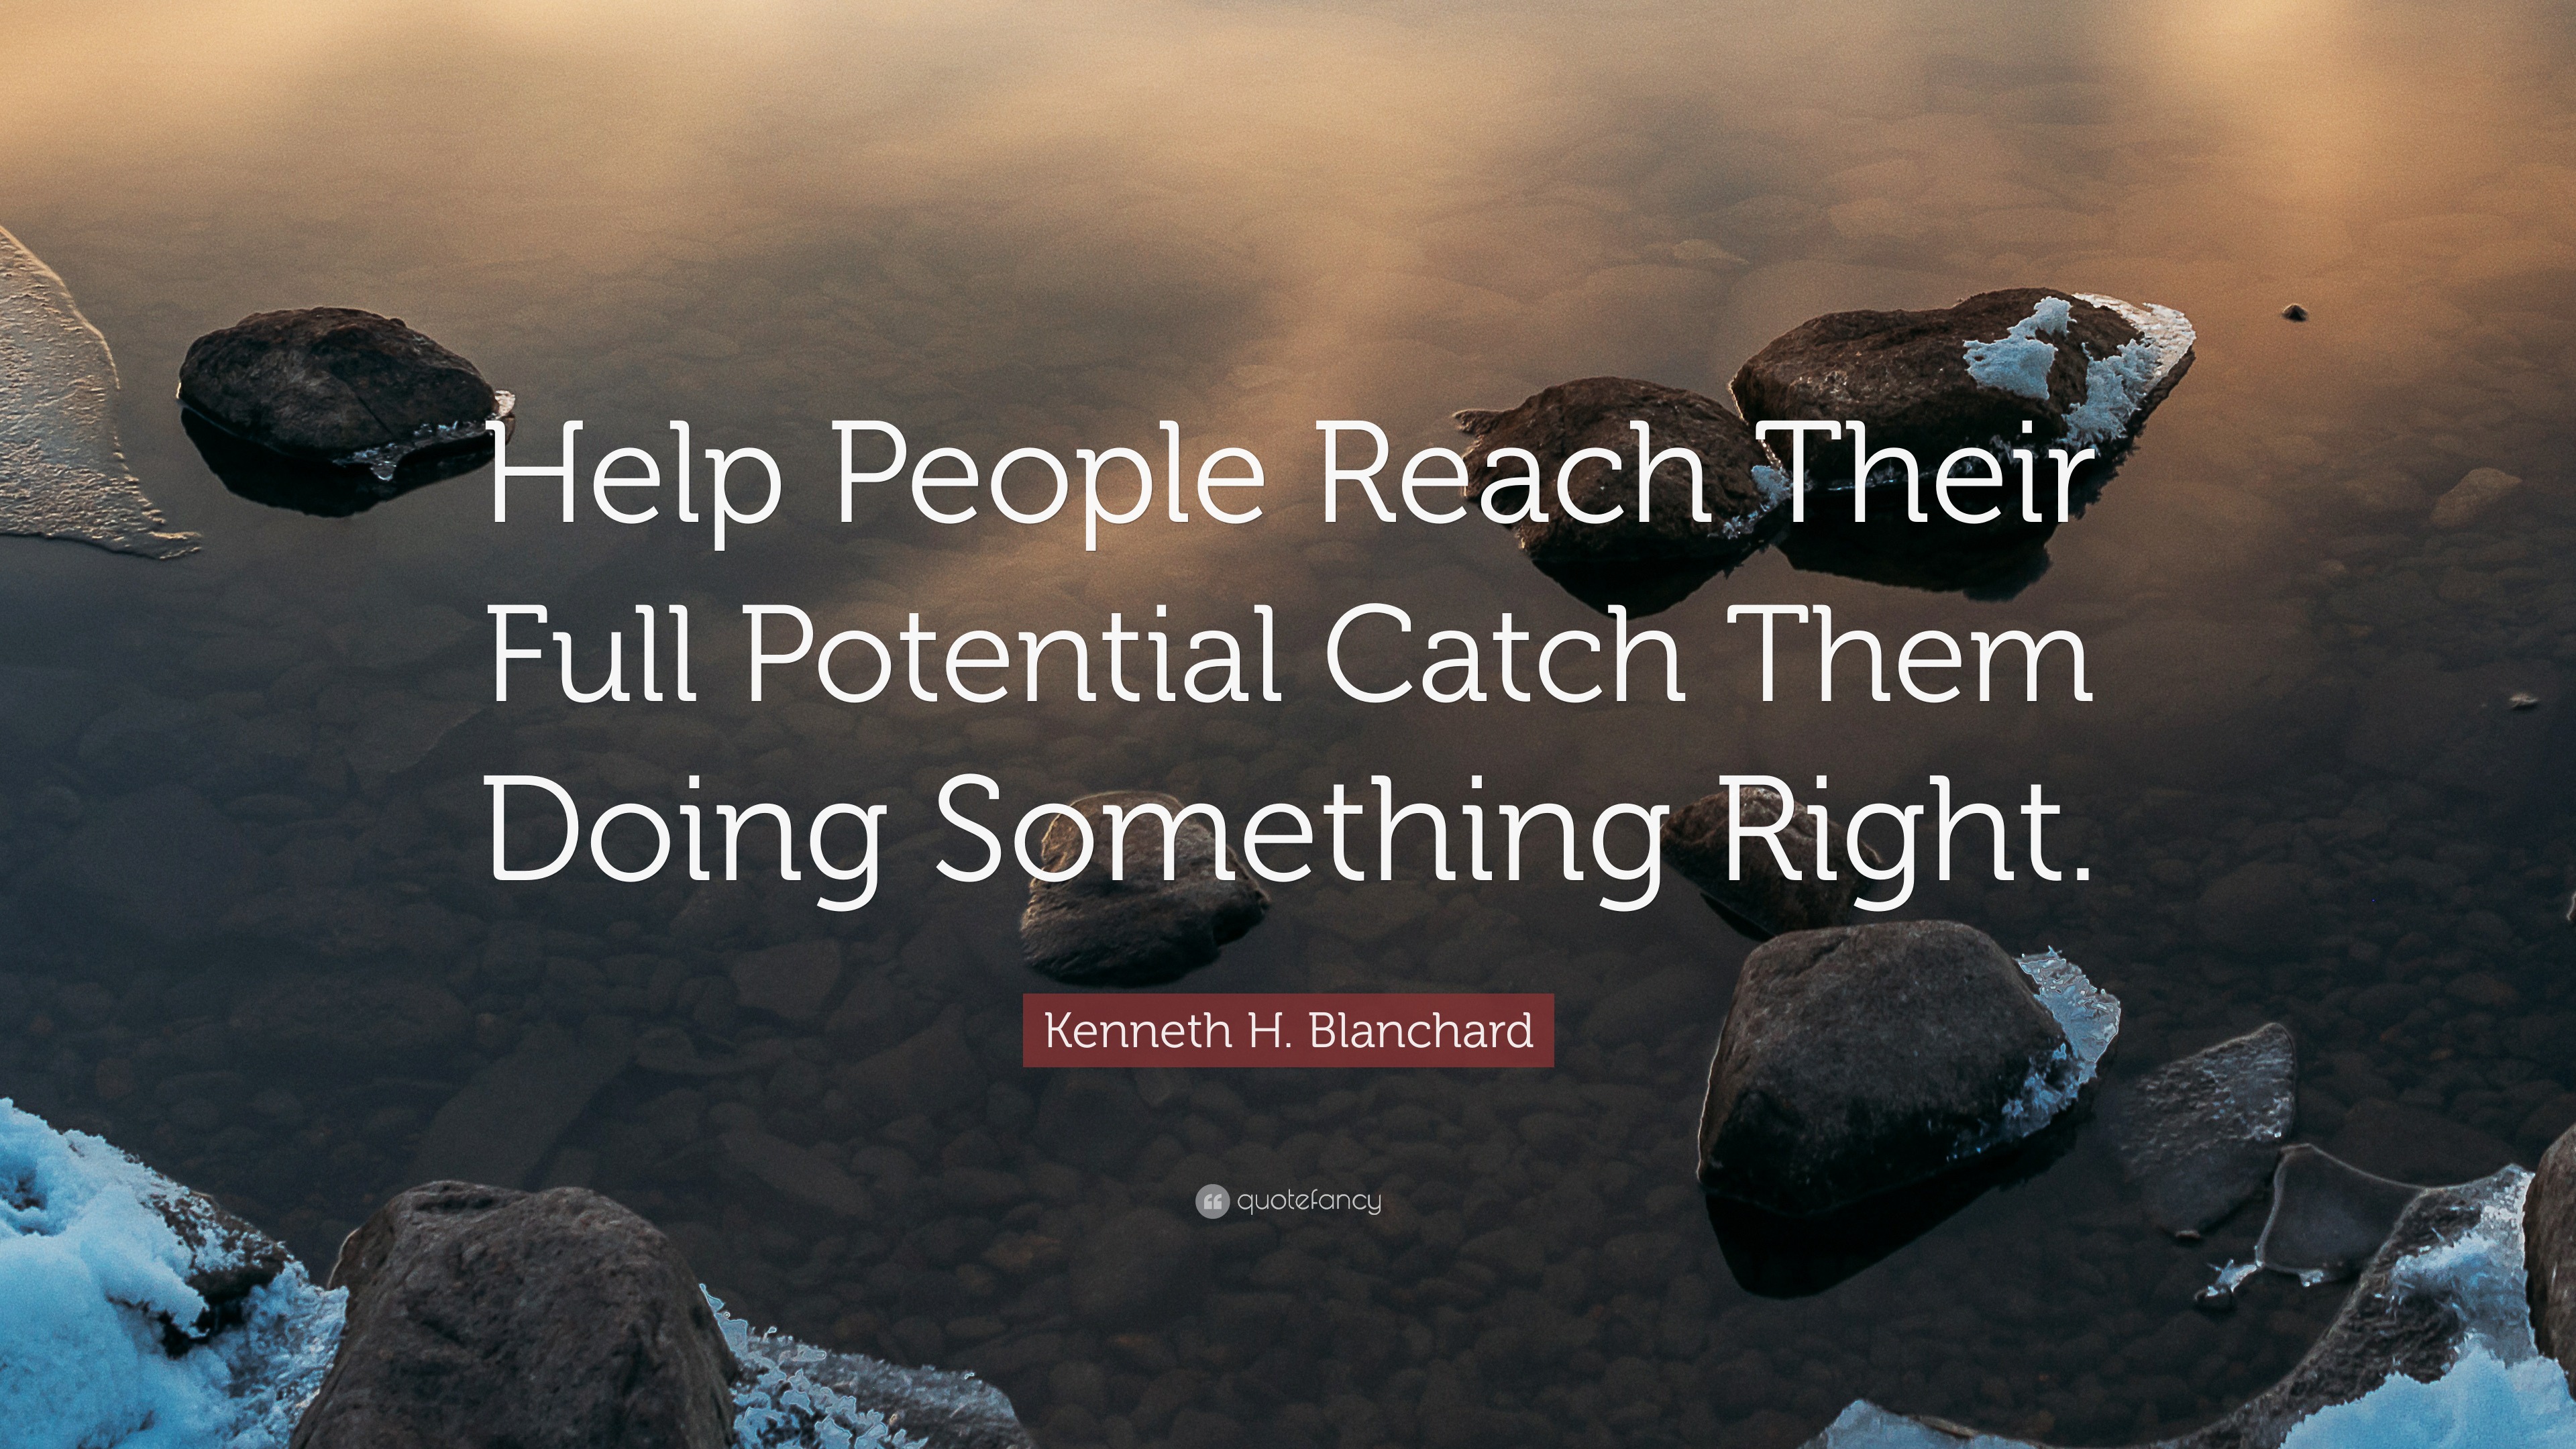 Helping Leaders Reach Their Potential